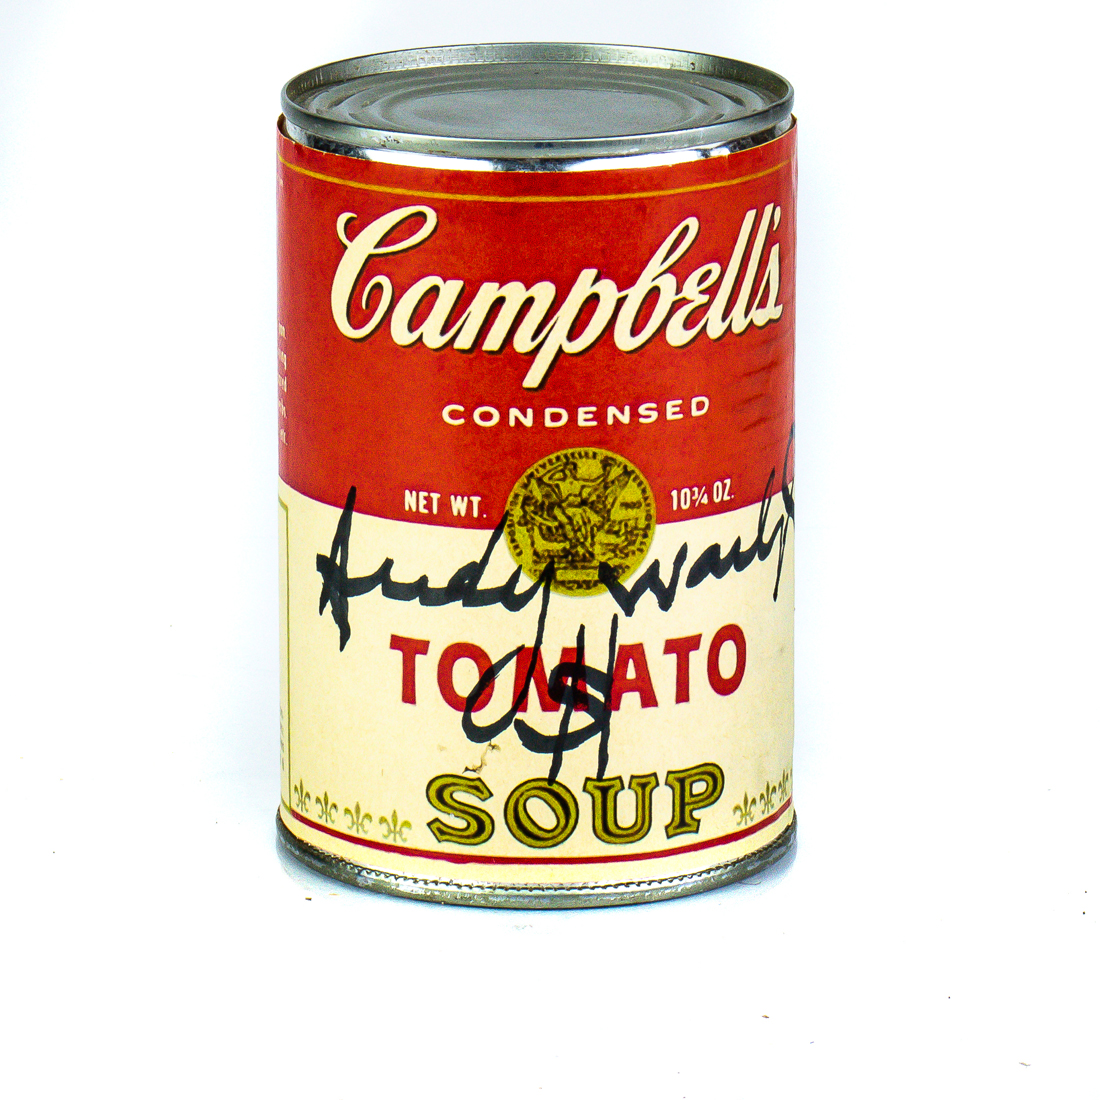 SOUP CAN, ATTRIBUTED TO ANDY WARHOL